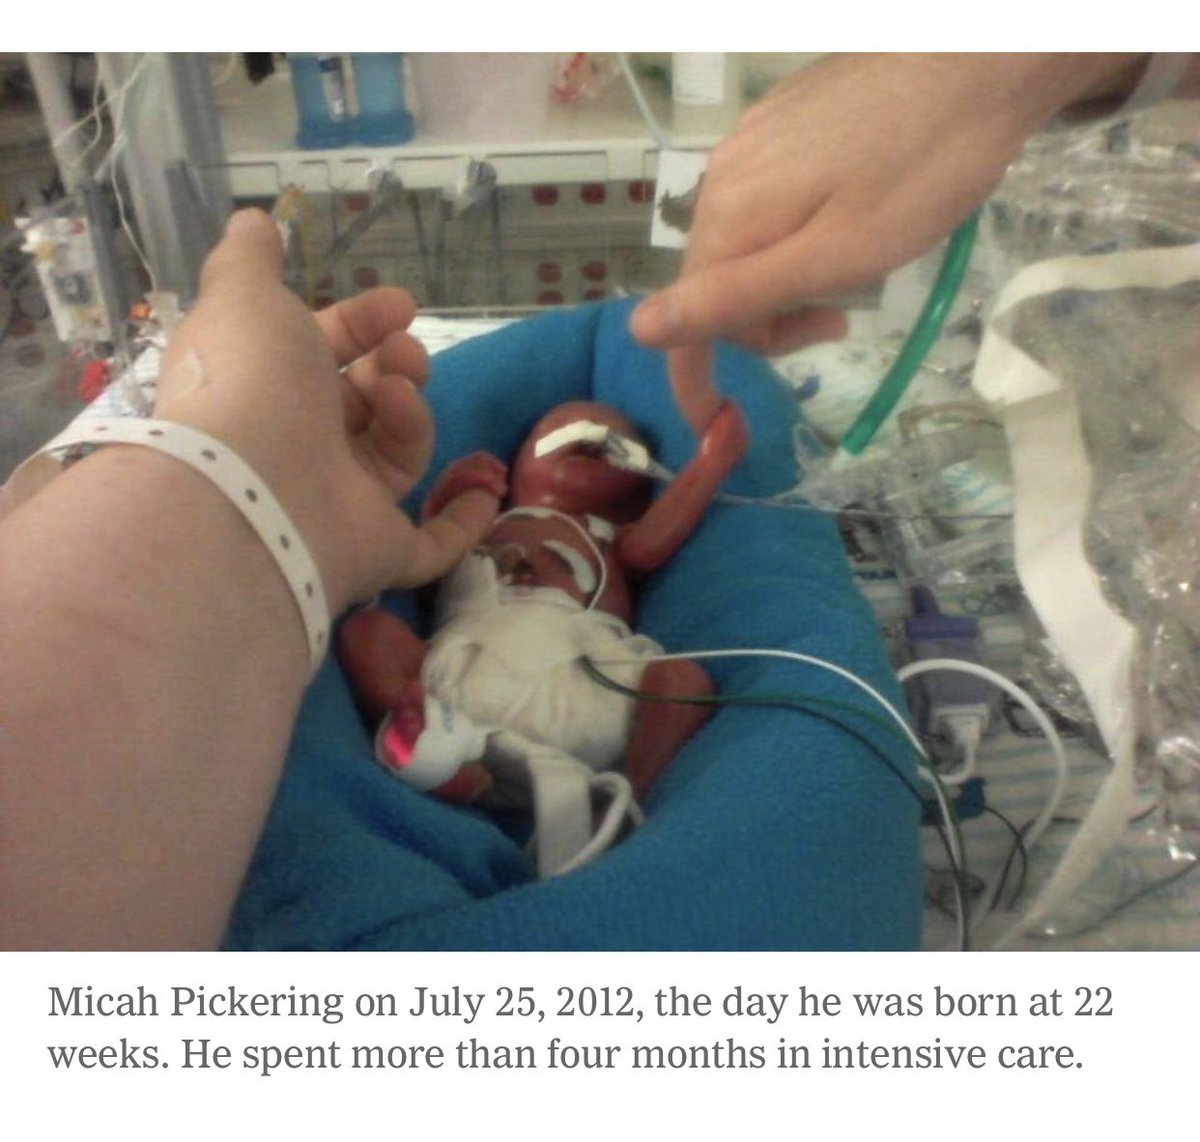 Micah Pickering was born at 22 weeks and 4 days.  https://www.newtondailynews.com/2015/05/15/2-year-old-newton-boy-gains-national-attention/ajwnlh9/?page=2